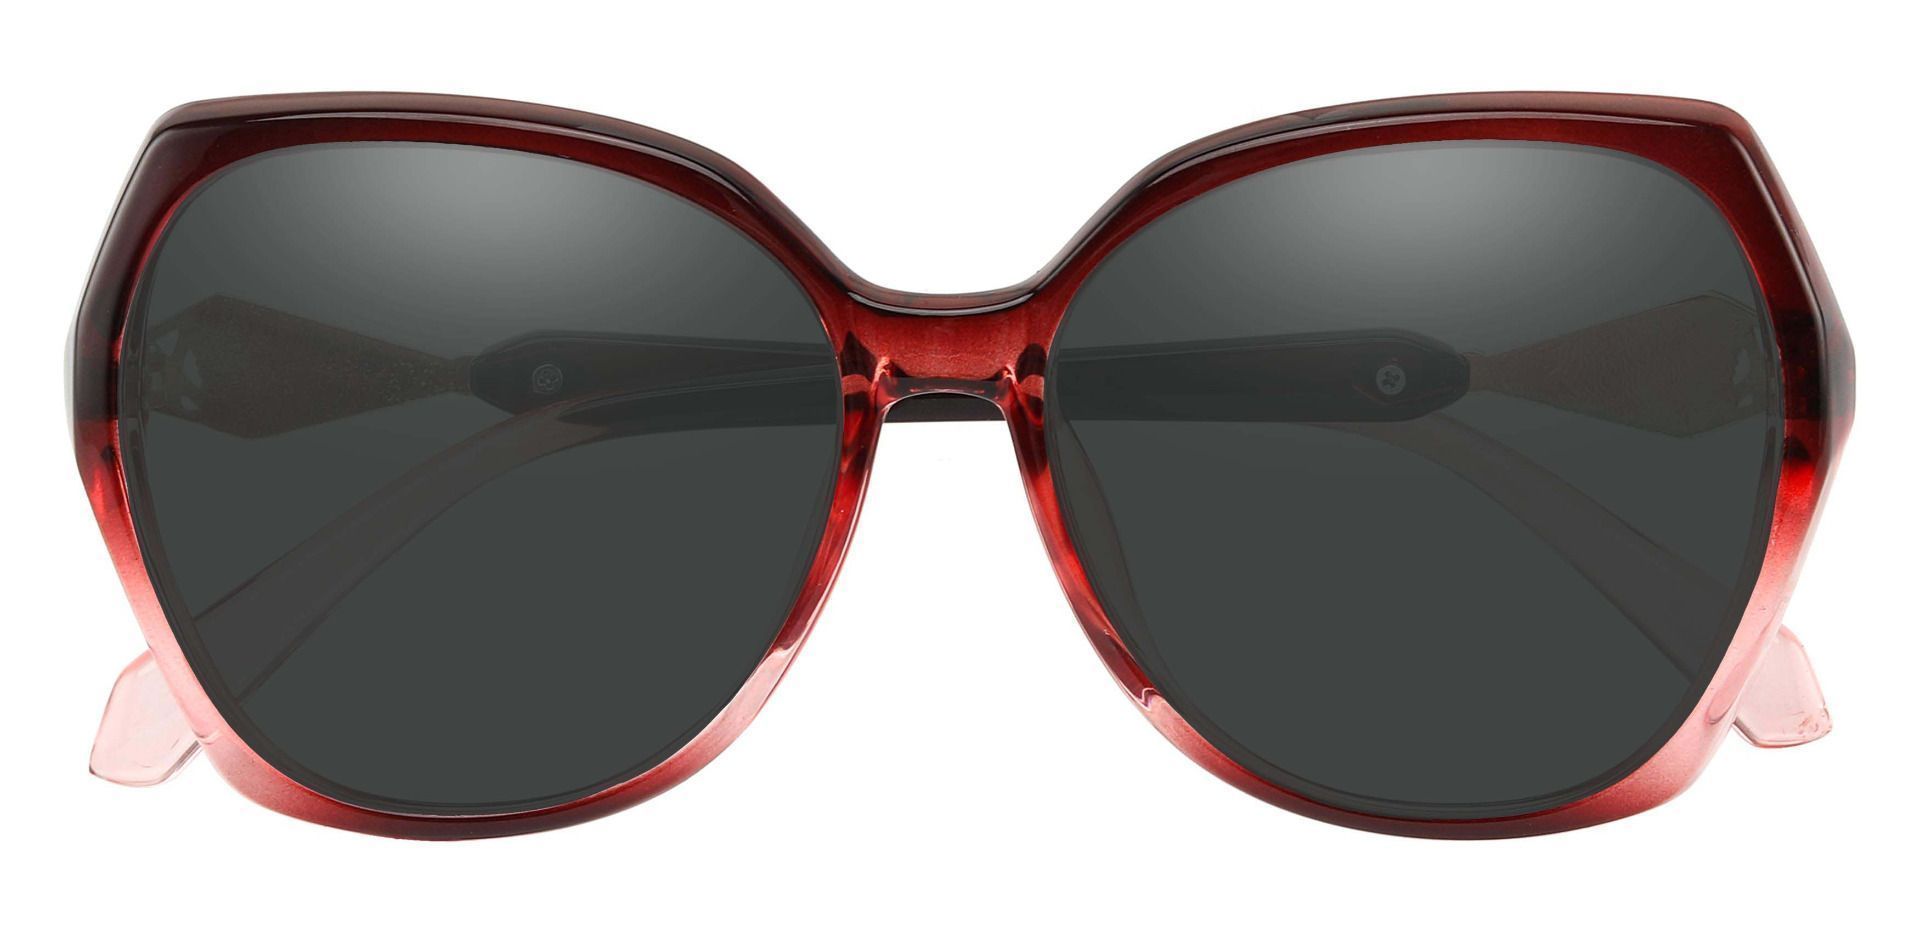 Solitaire Geometric Reading Sunglasses - Red Frame With Gray Lenses